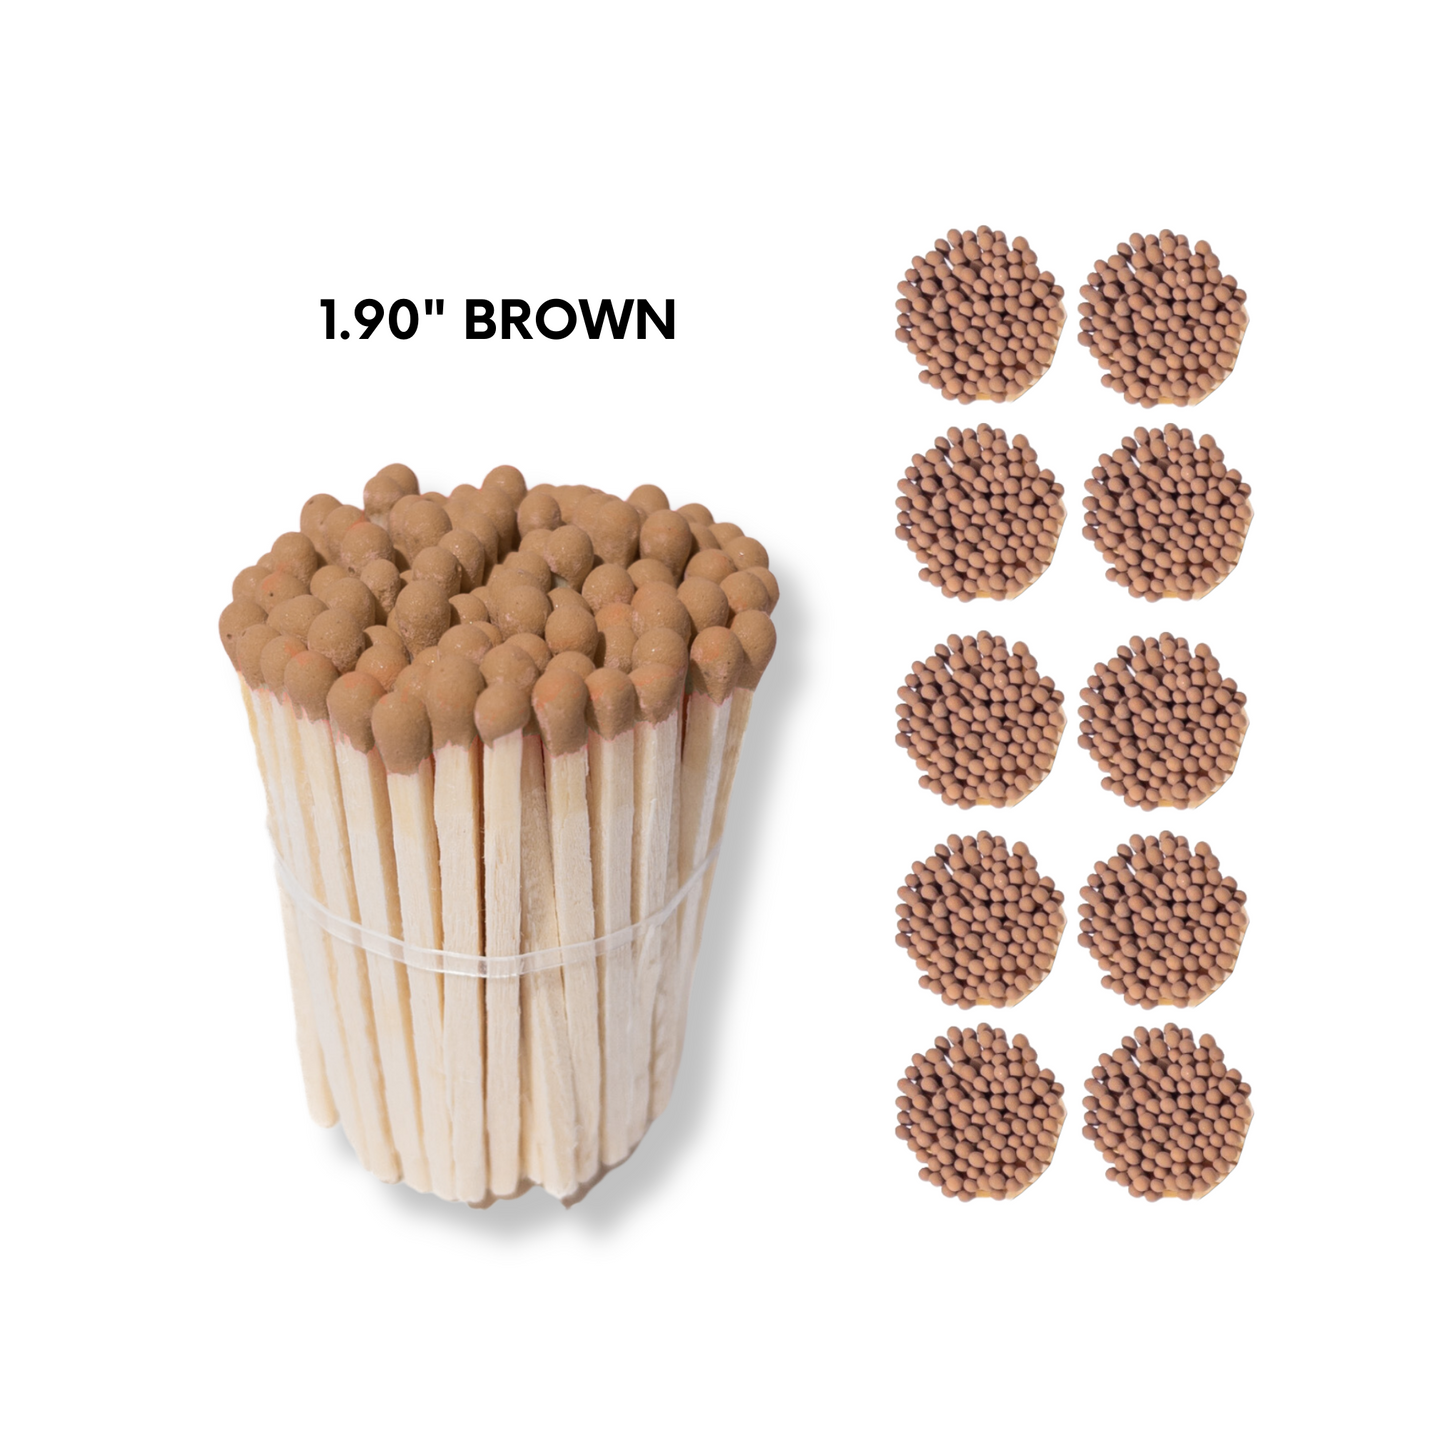 Brown Tip 1.90" - Safety Matches